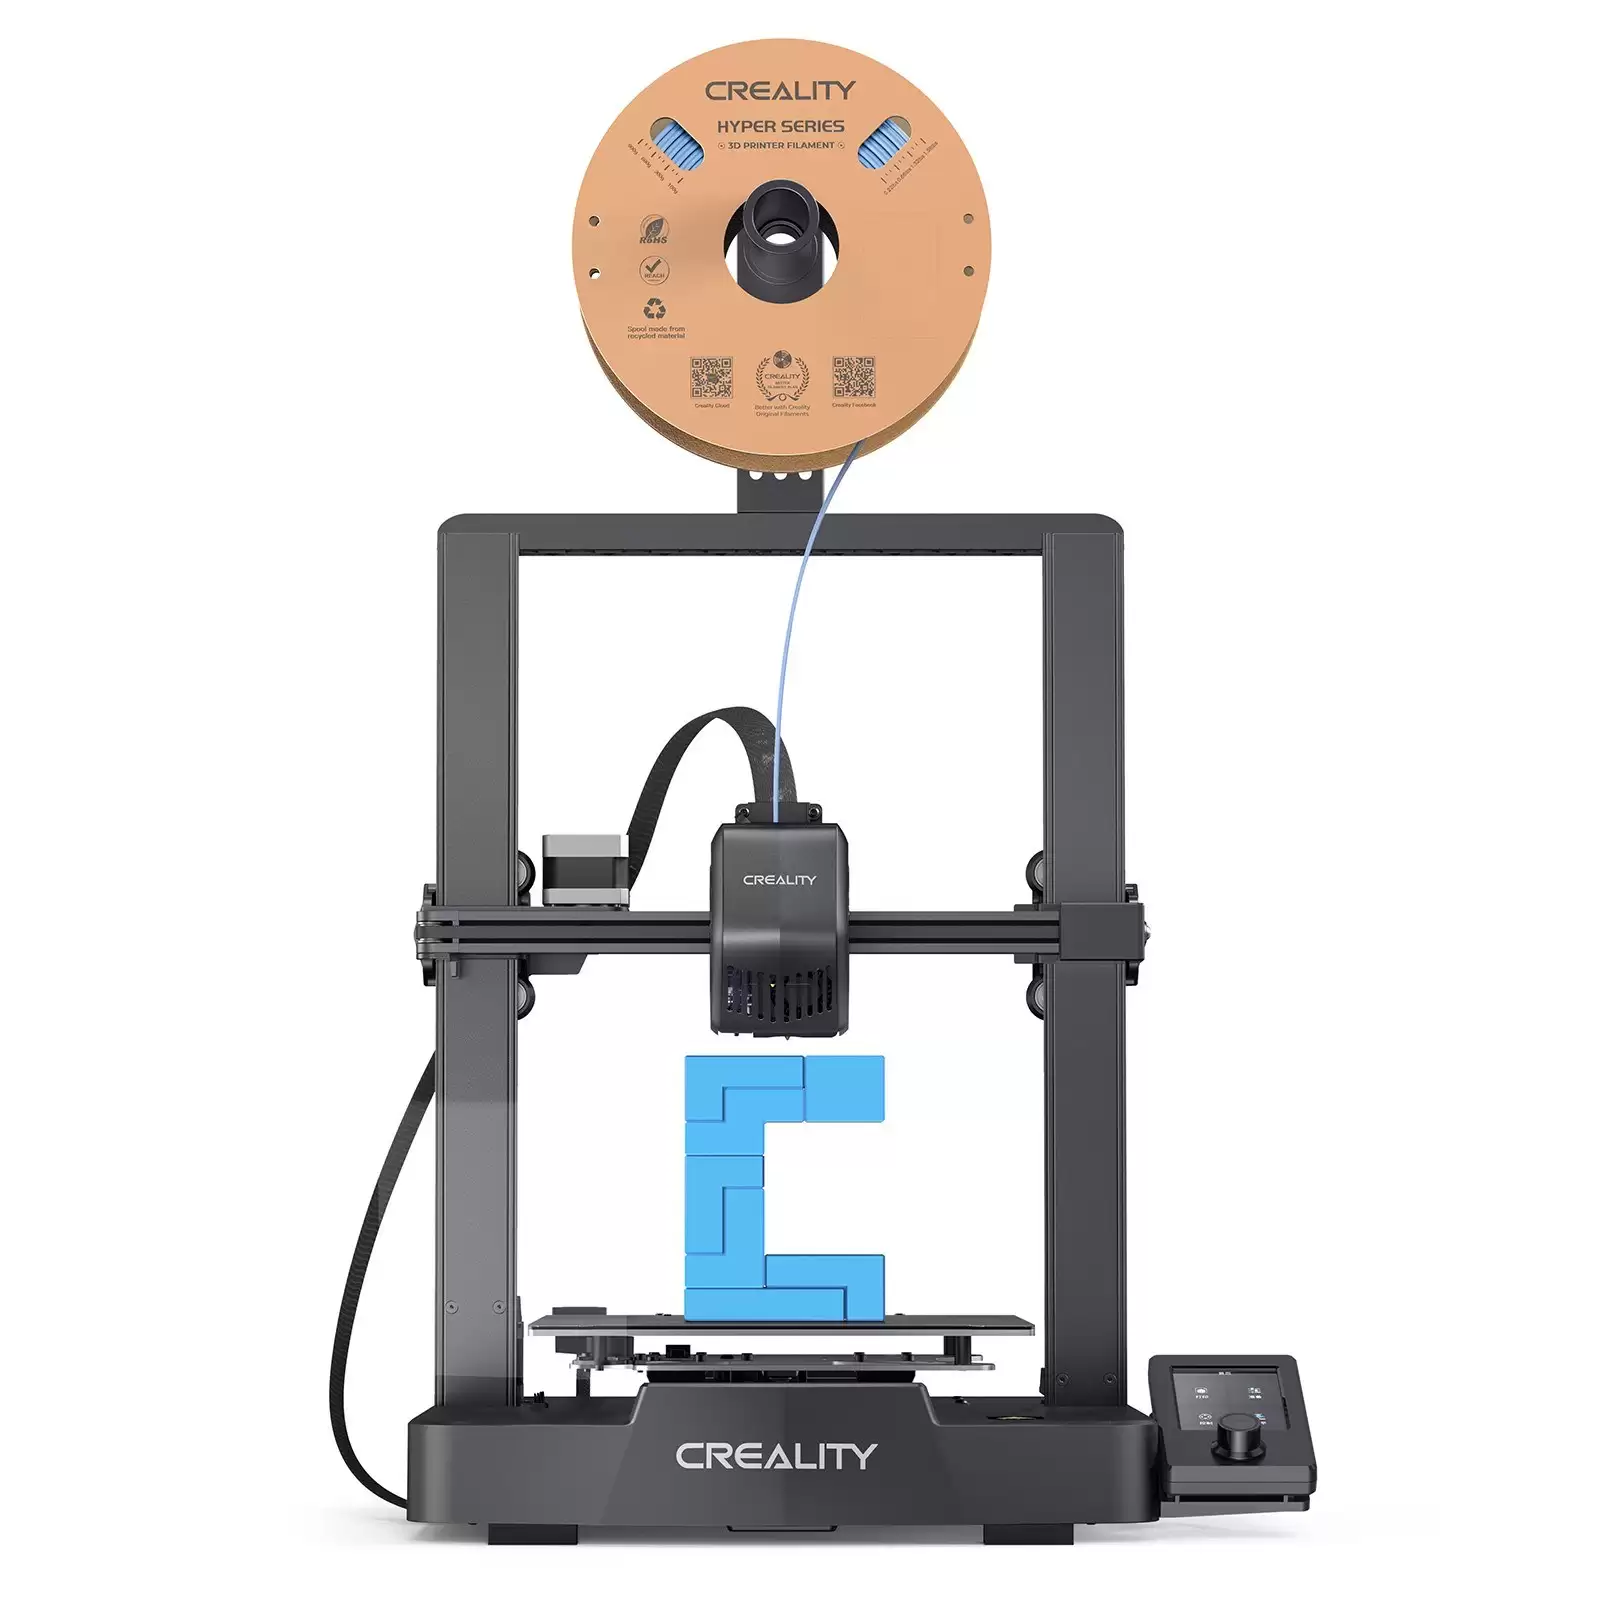 Order In Just $150.00creality Ender-3 V3 Se 3d Printer Cr Touch Auto Leveling 220*220*250mm Printing Size And 3.2in Color Knob Screen With This Discount Coupon At Tomtop